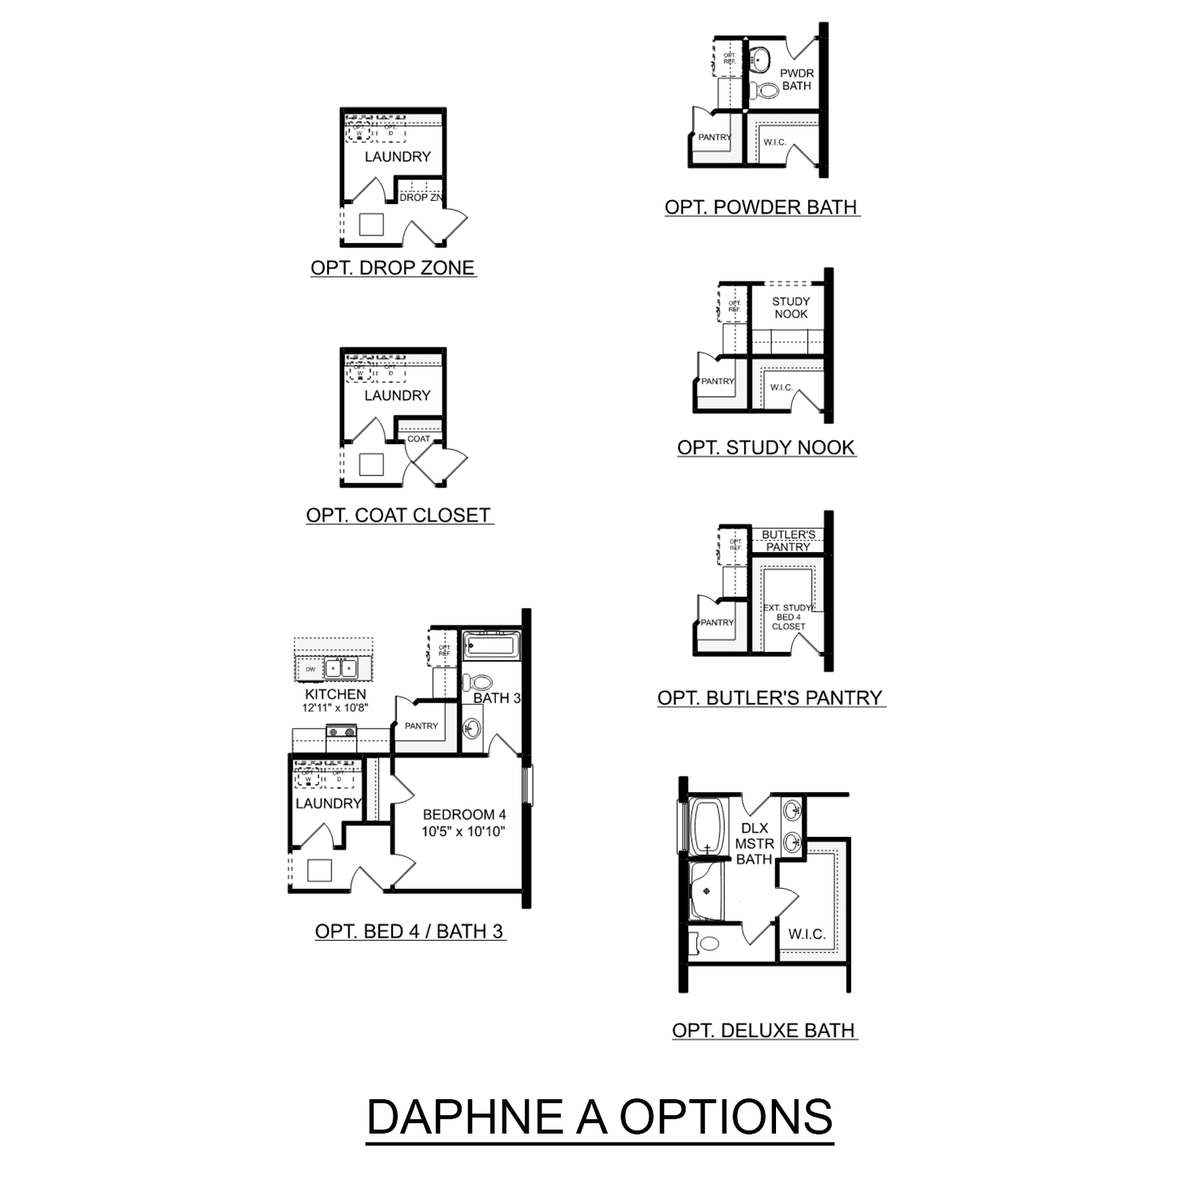 2 - The Daphne floor plan layout for 203 Sunny Springs Court in Davidson Homes' Flint Meadows community.